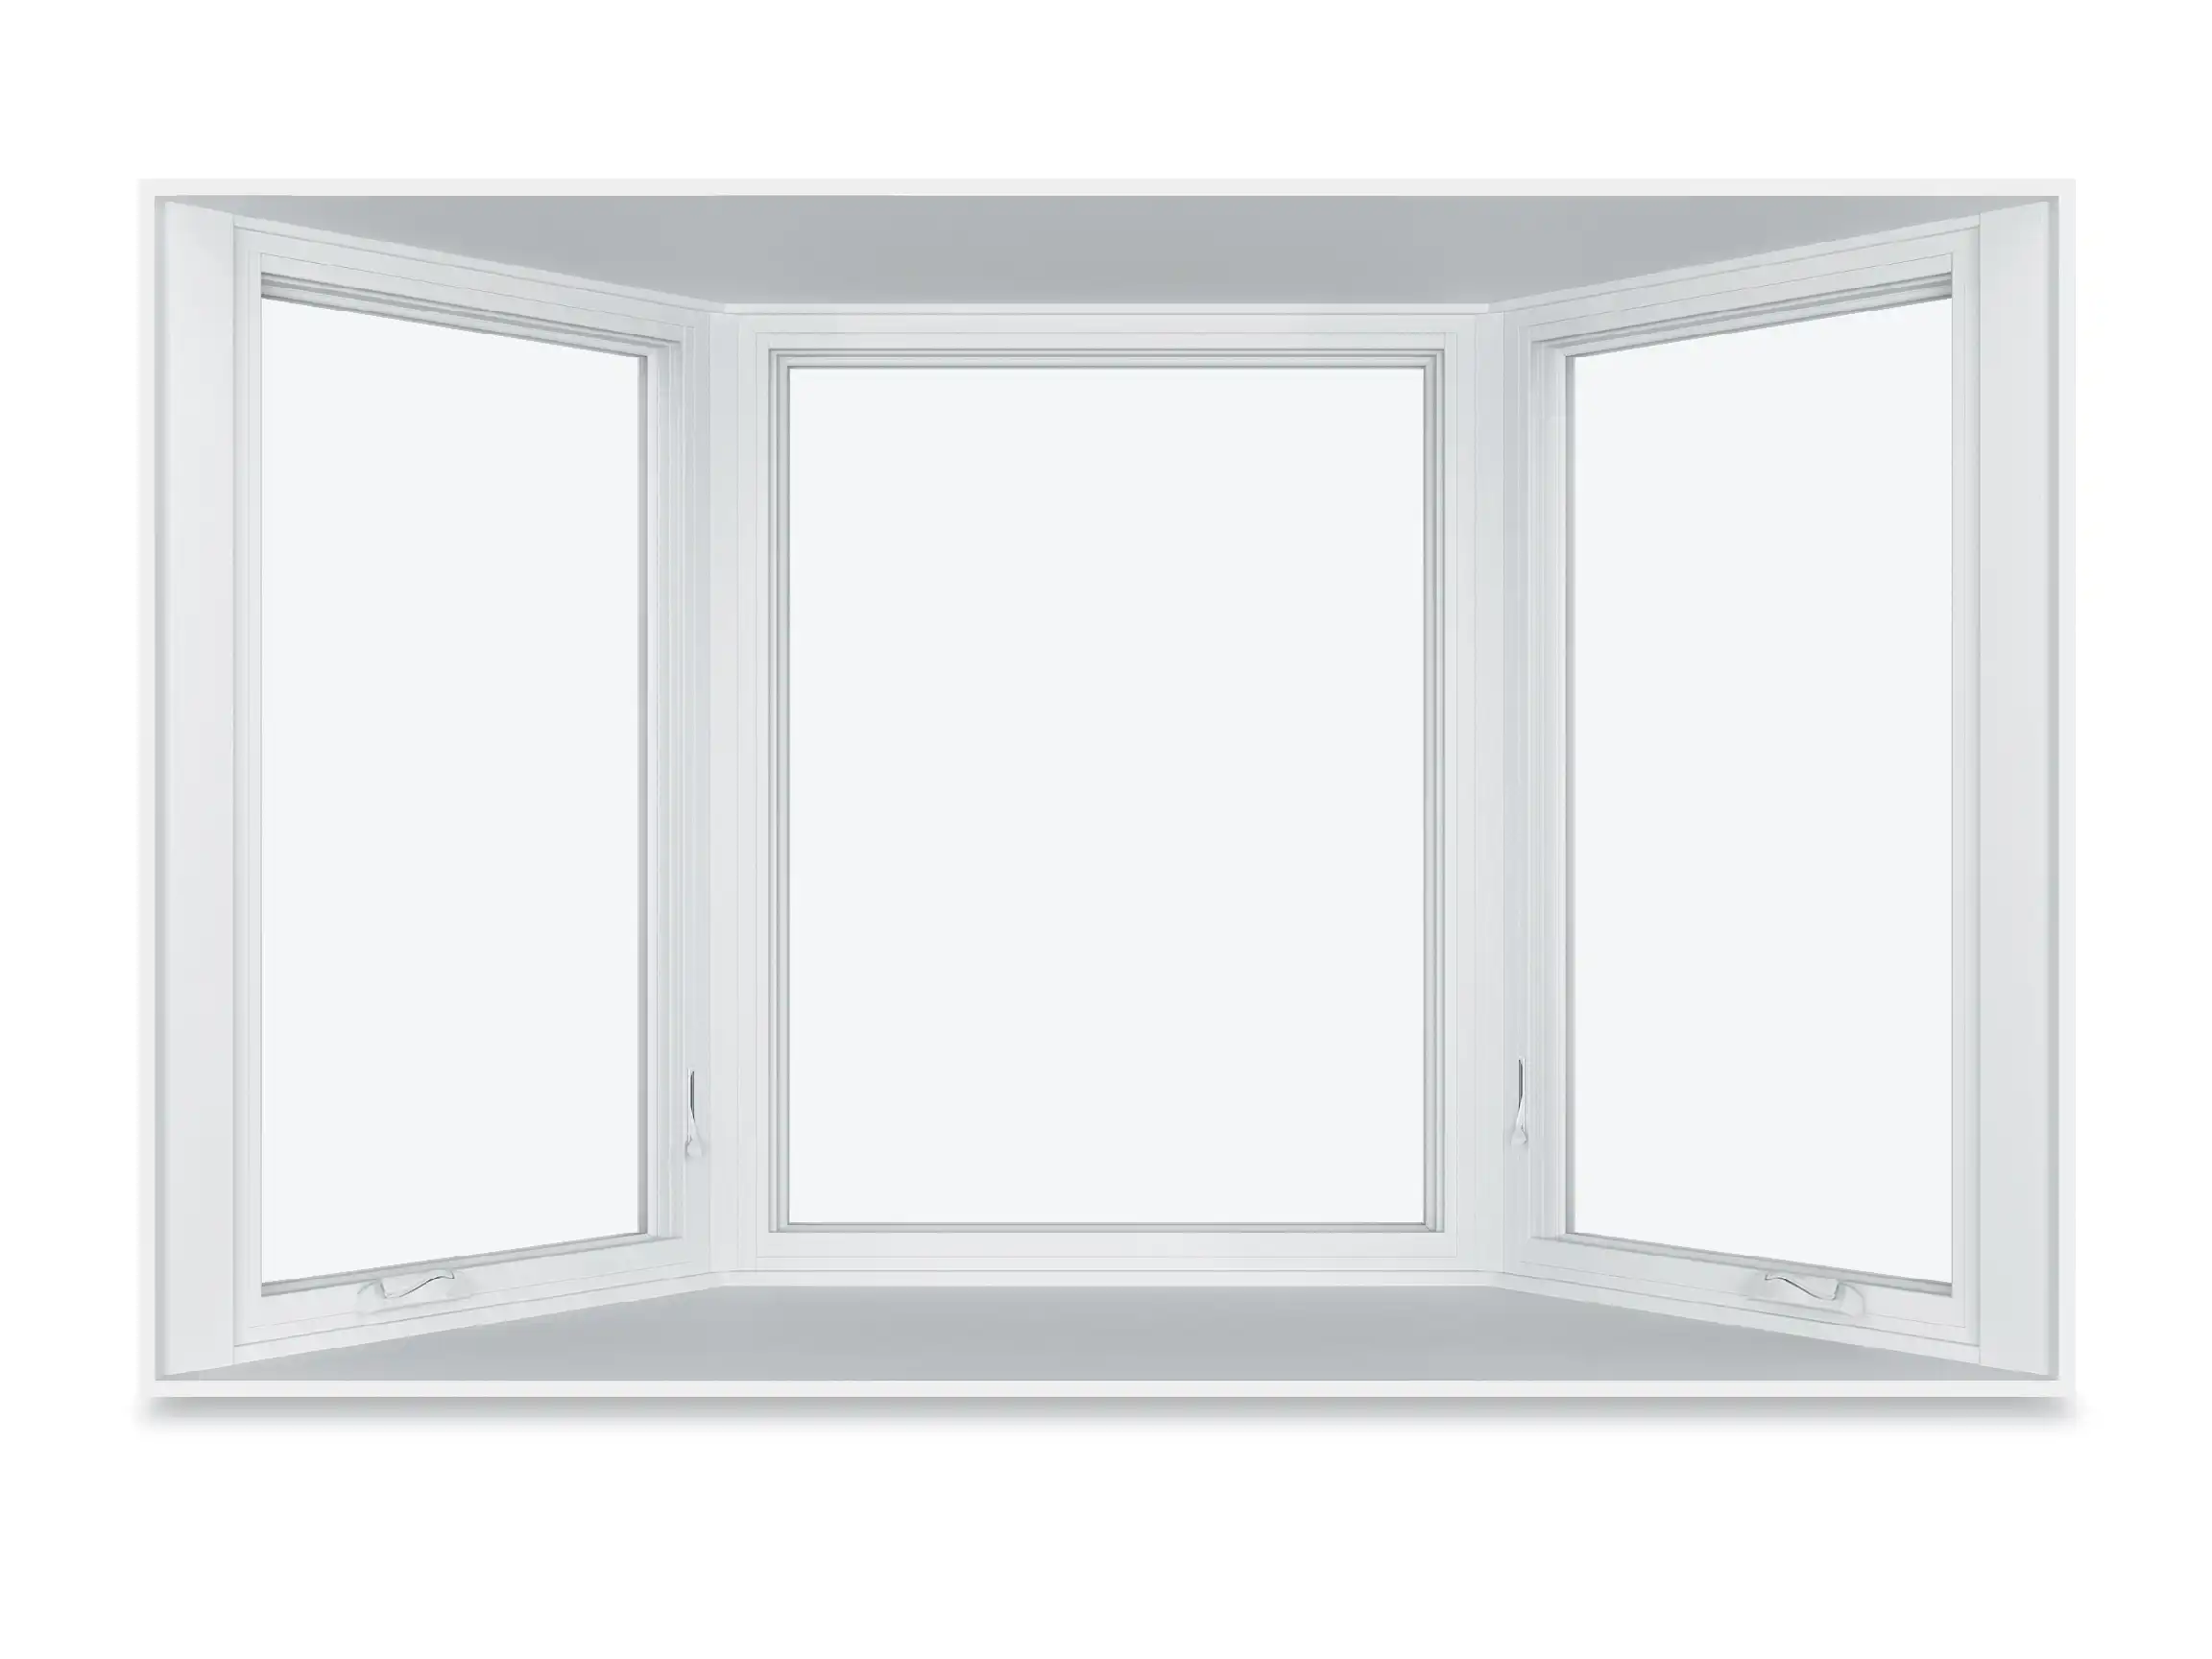 View of a white Marvin Replacement window with flanking Casement windows and a picture window in the middle.